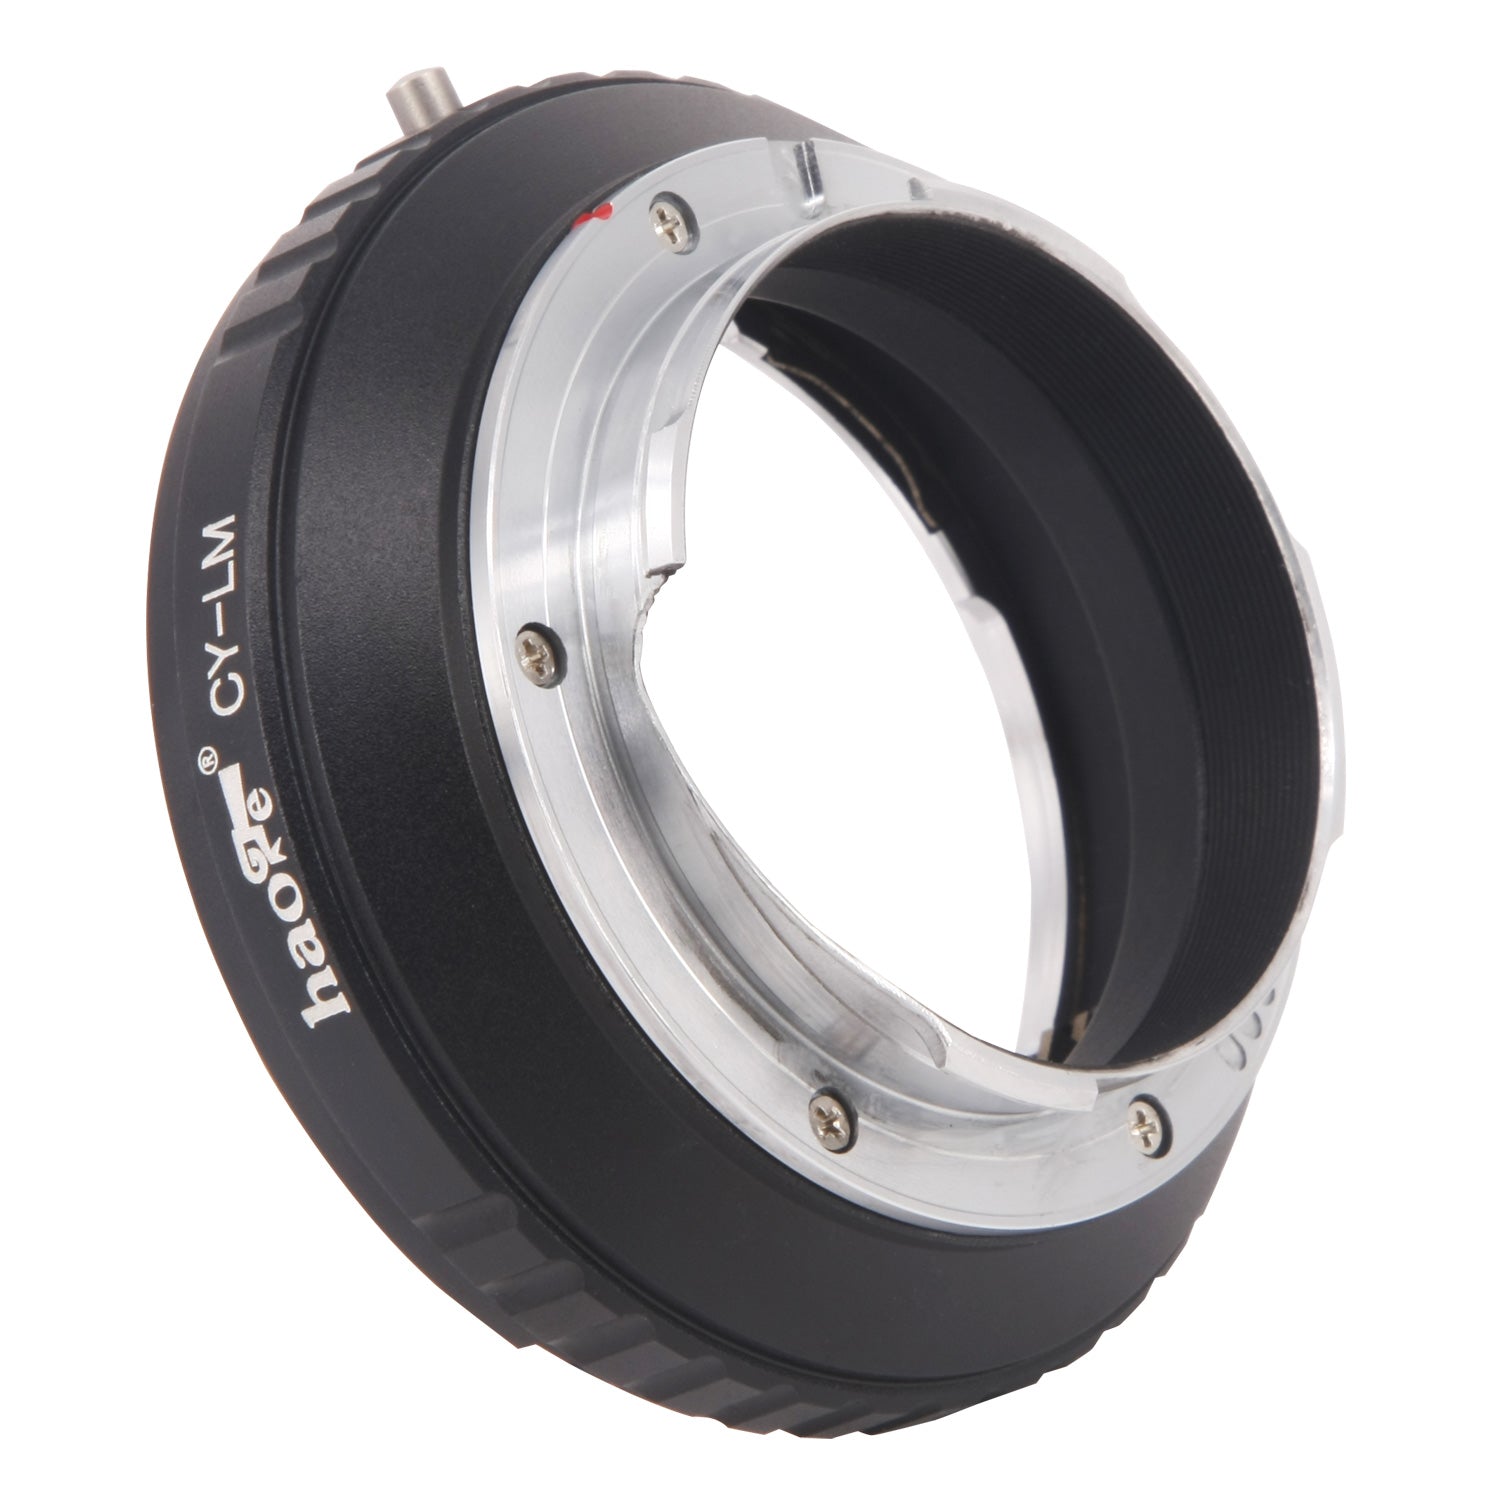 Haoge Lens Mount Adapter for Contax / Yashica C/Y CY Lens to Leica M-mount Camera such as M240, M240P, M262, M3, M2, M1, M4, M5, CL, M6, MP, M7, M8, M9, M9-P, M Monochrom, M-E, M, M-P, M10, M-A